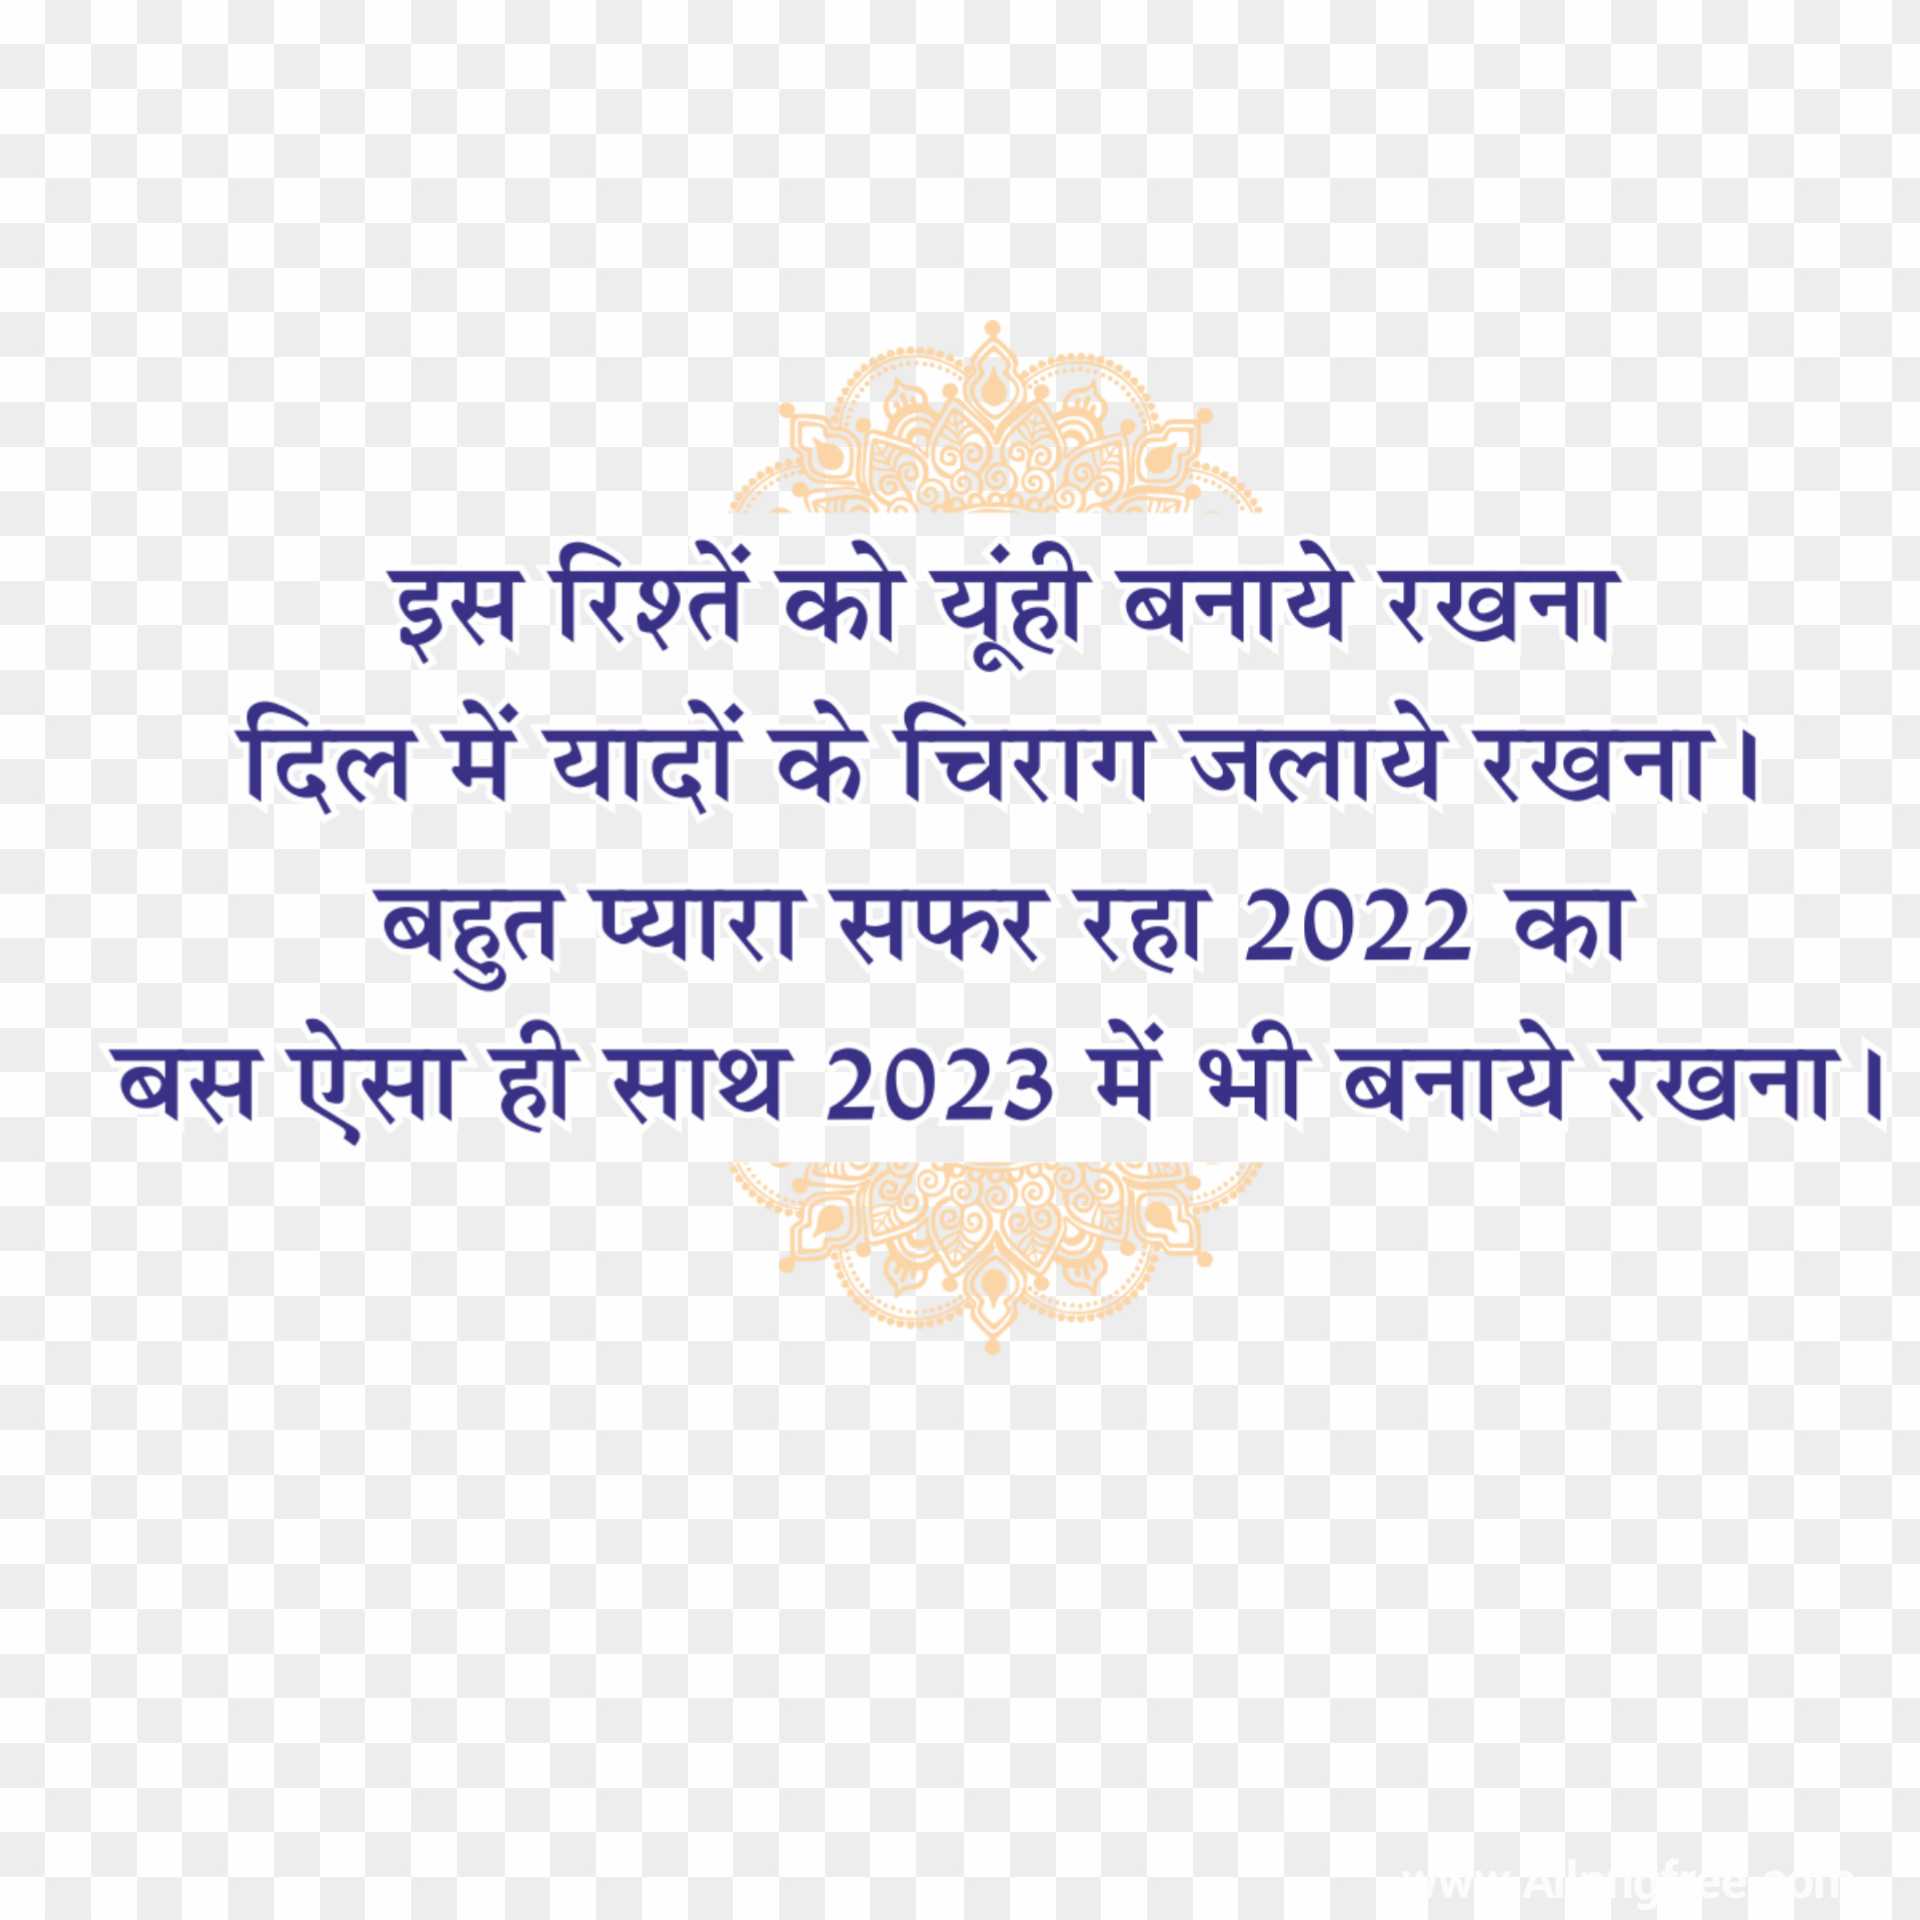 New year 2023 quotes in Hindi text PNG images transparent background